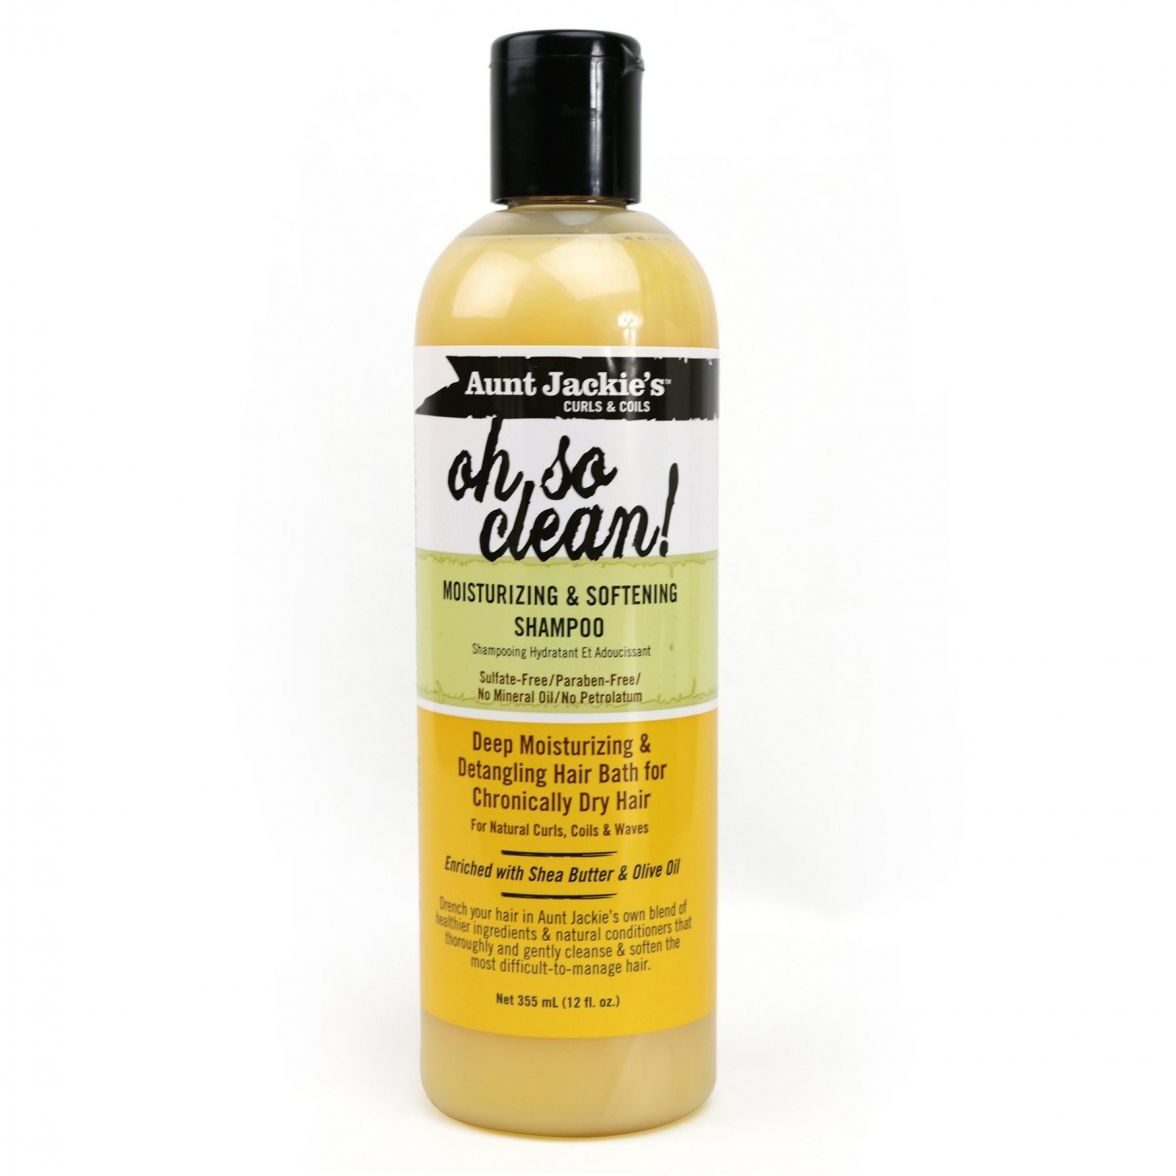 Aunt Jackie's Curls & Coils Oh So Clean! Moisturizing & Softening Shampoo 355m